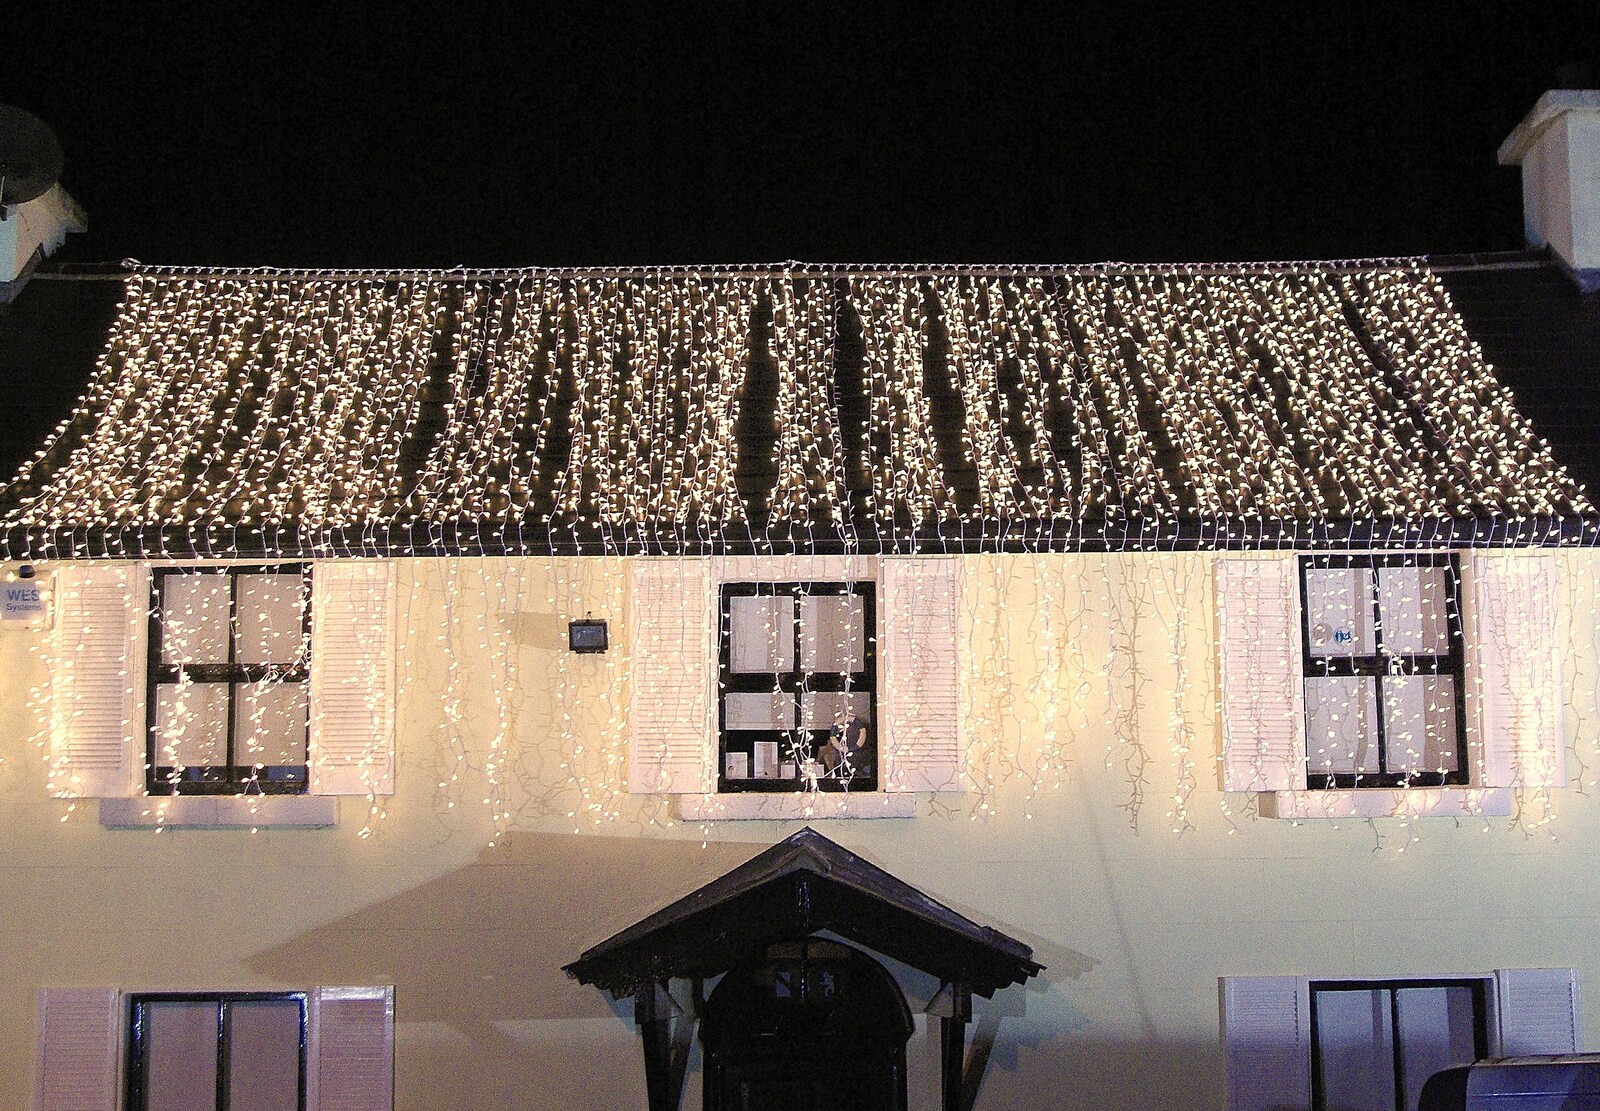 Rockford House on Stradbrook Road from The BBs at the Park Hotel, and Christmas in Blackrock, Dublin, Ireland - 25th December 2006